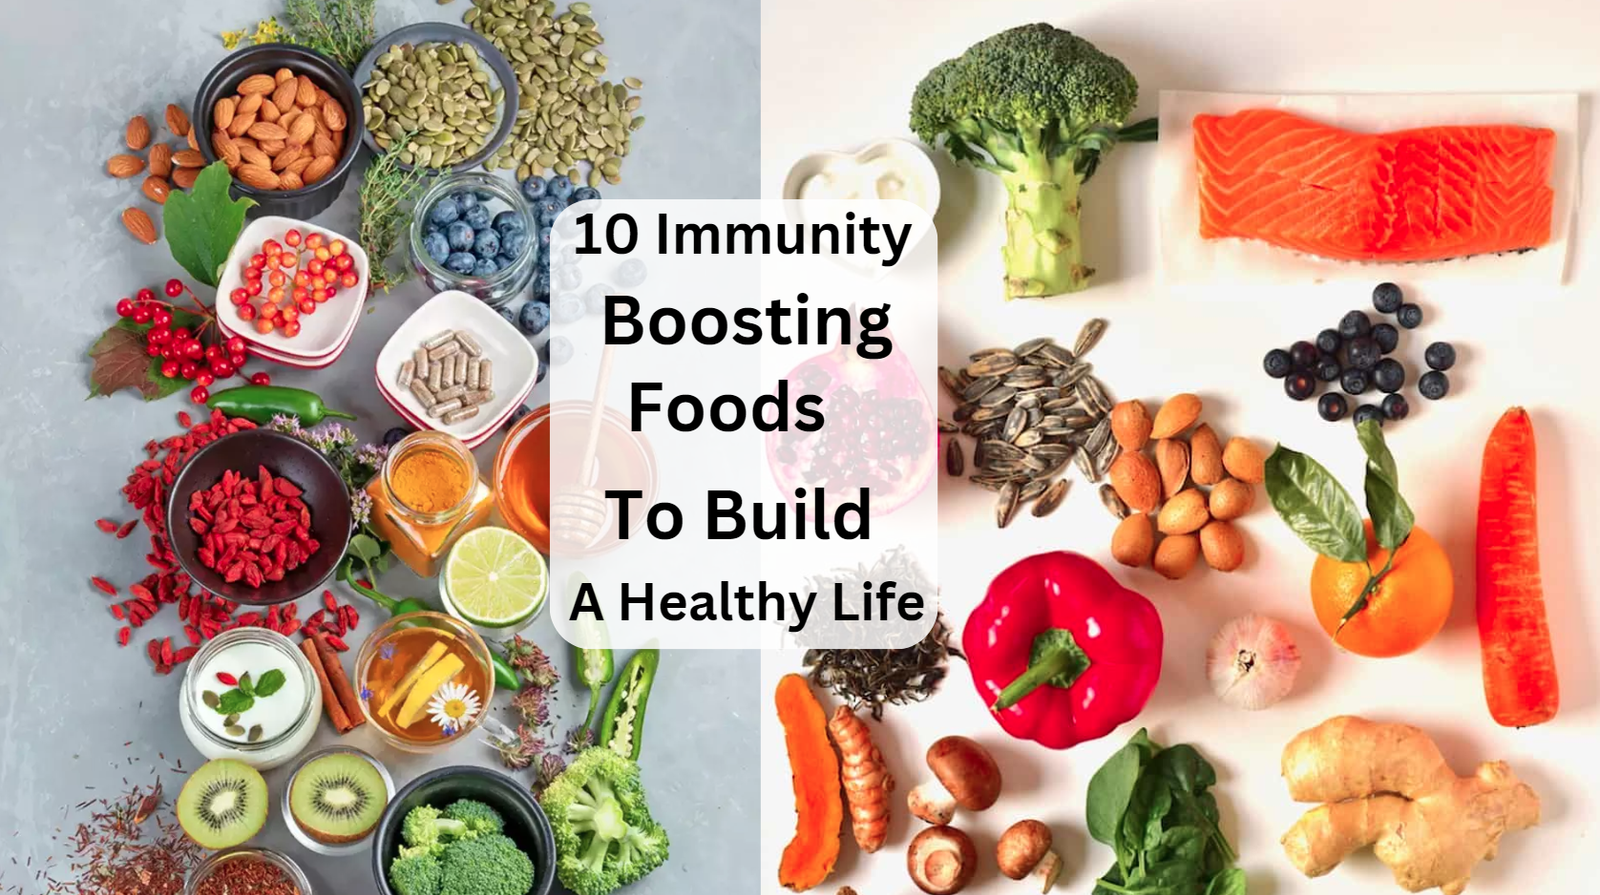 10 Immunity Boosting Foods To Build A Healthy Life